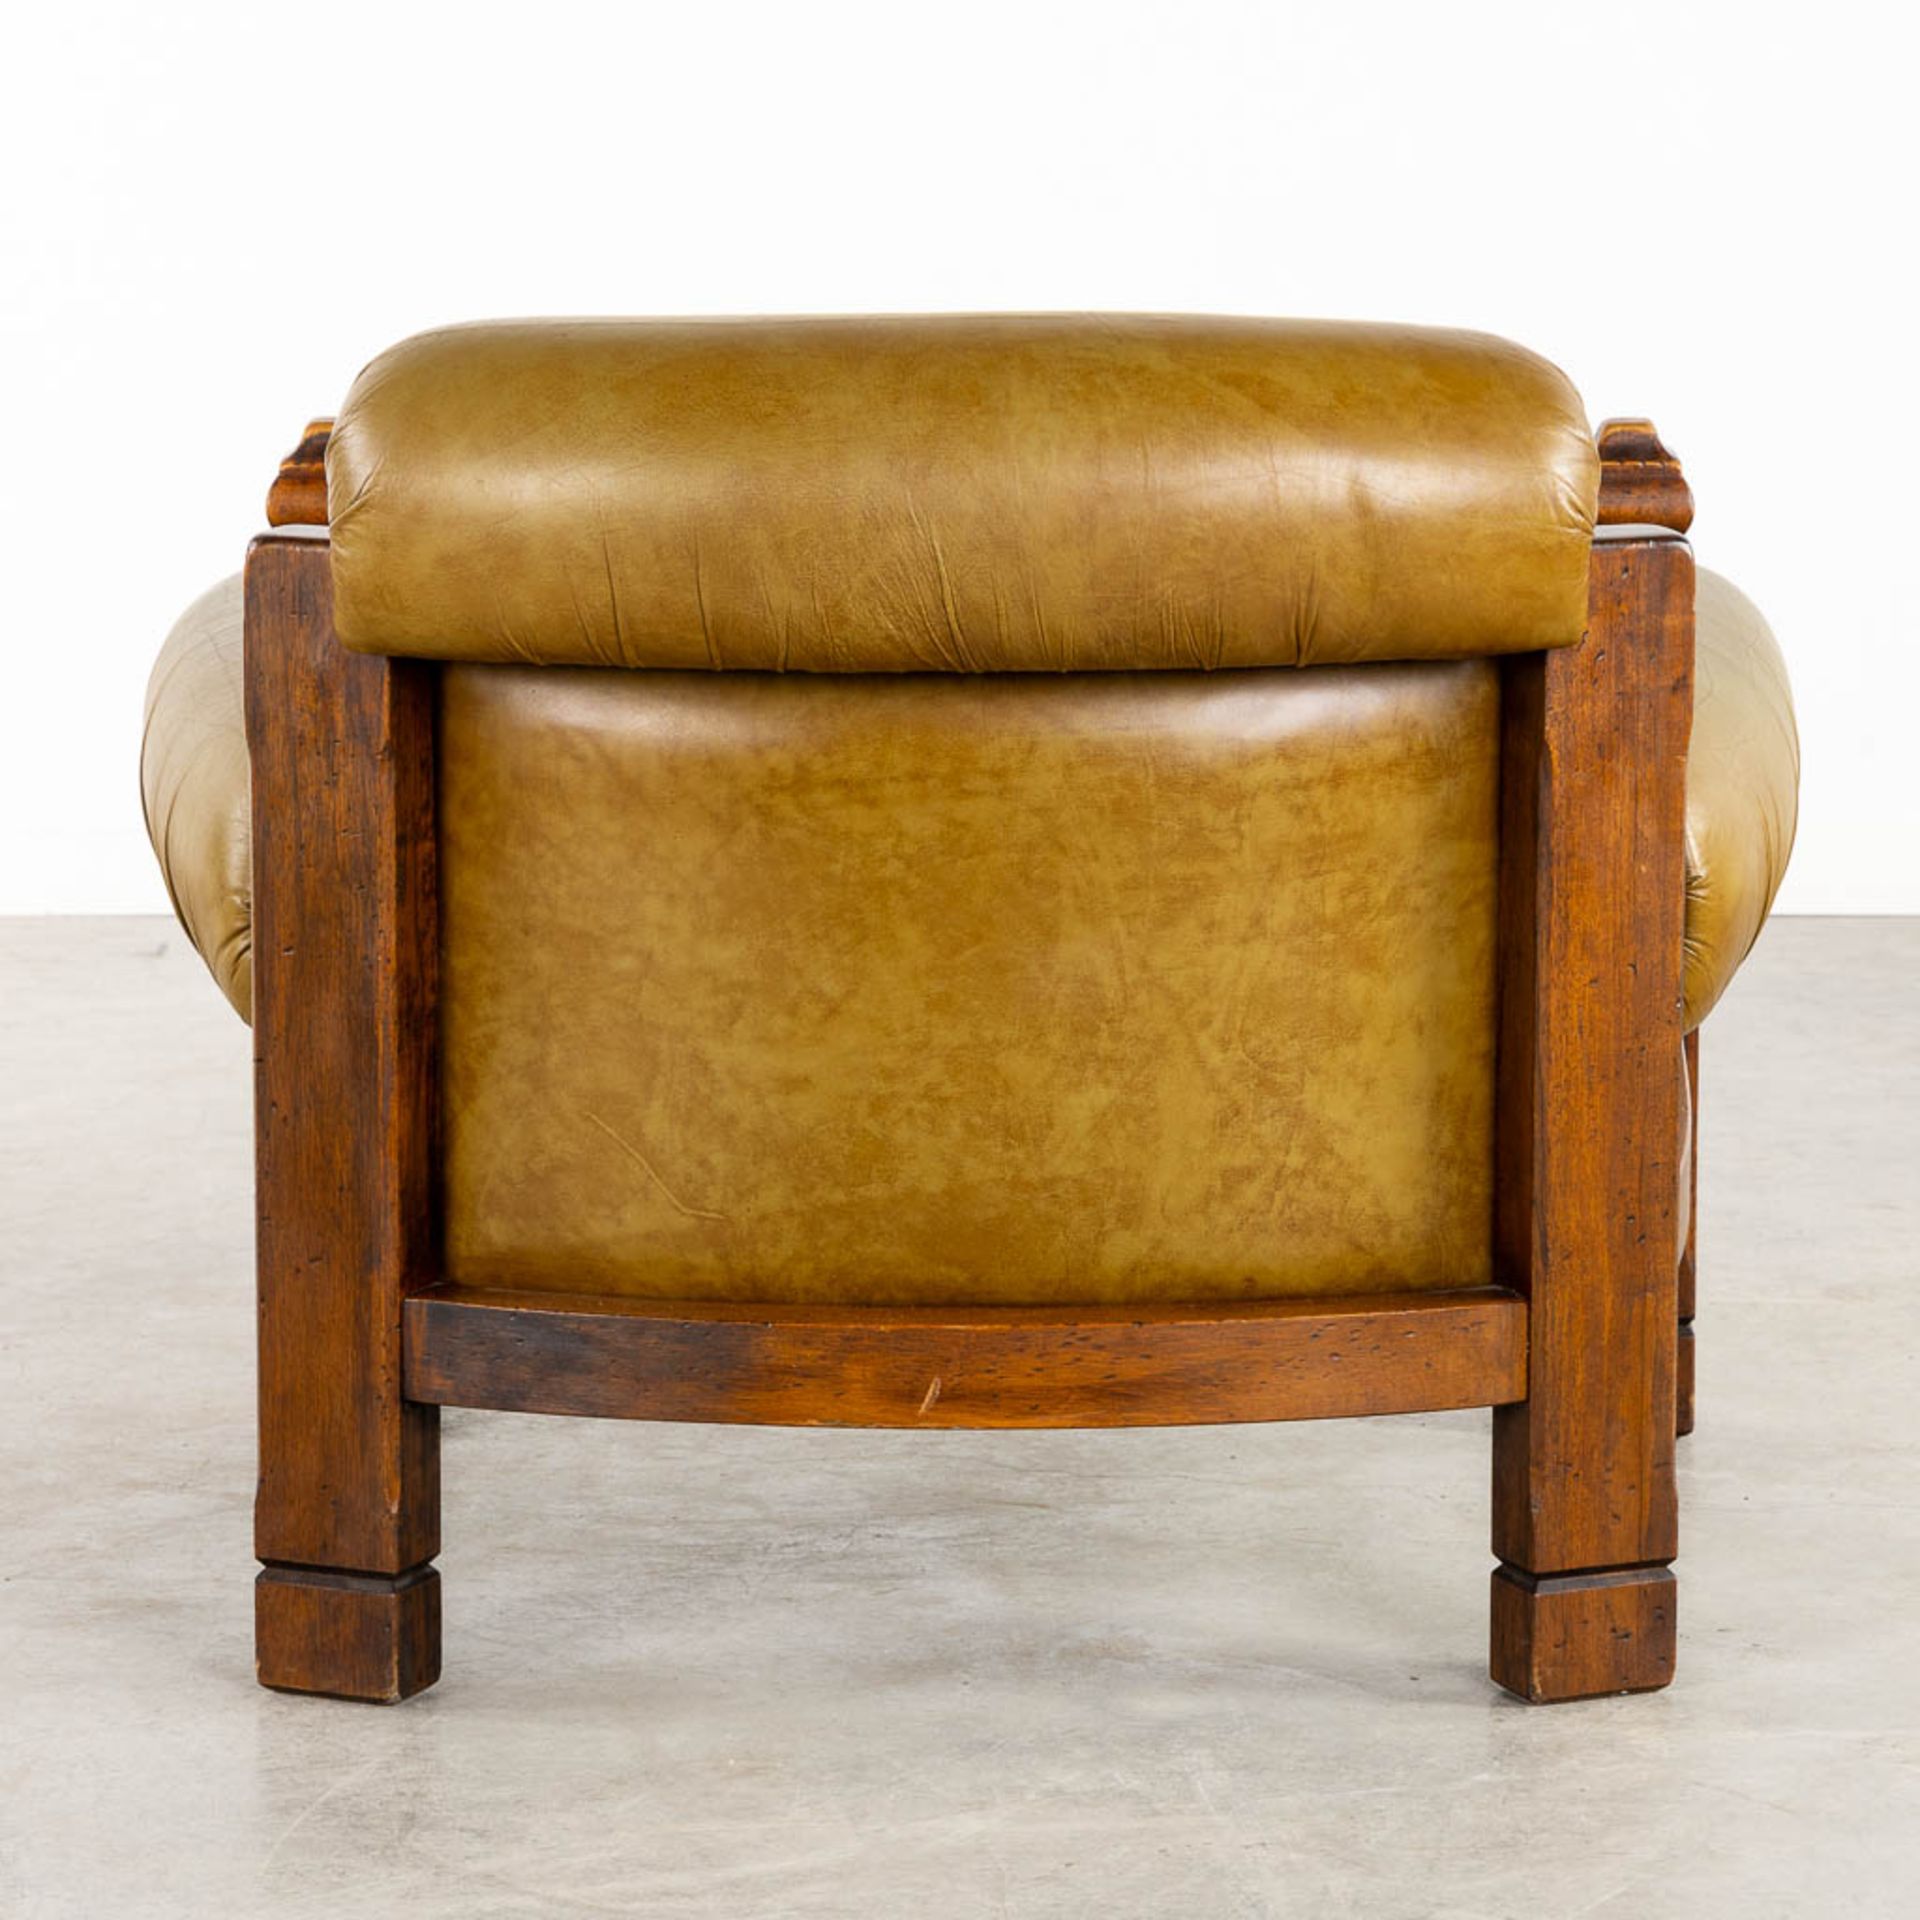 Four identical leather and wood lounge chairs, Circa 1960. (L:94 x W:96 x H:78 cm) - Image 8 of 10